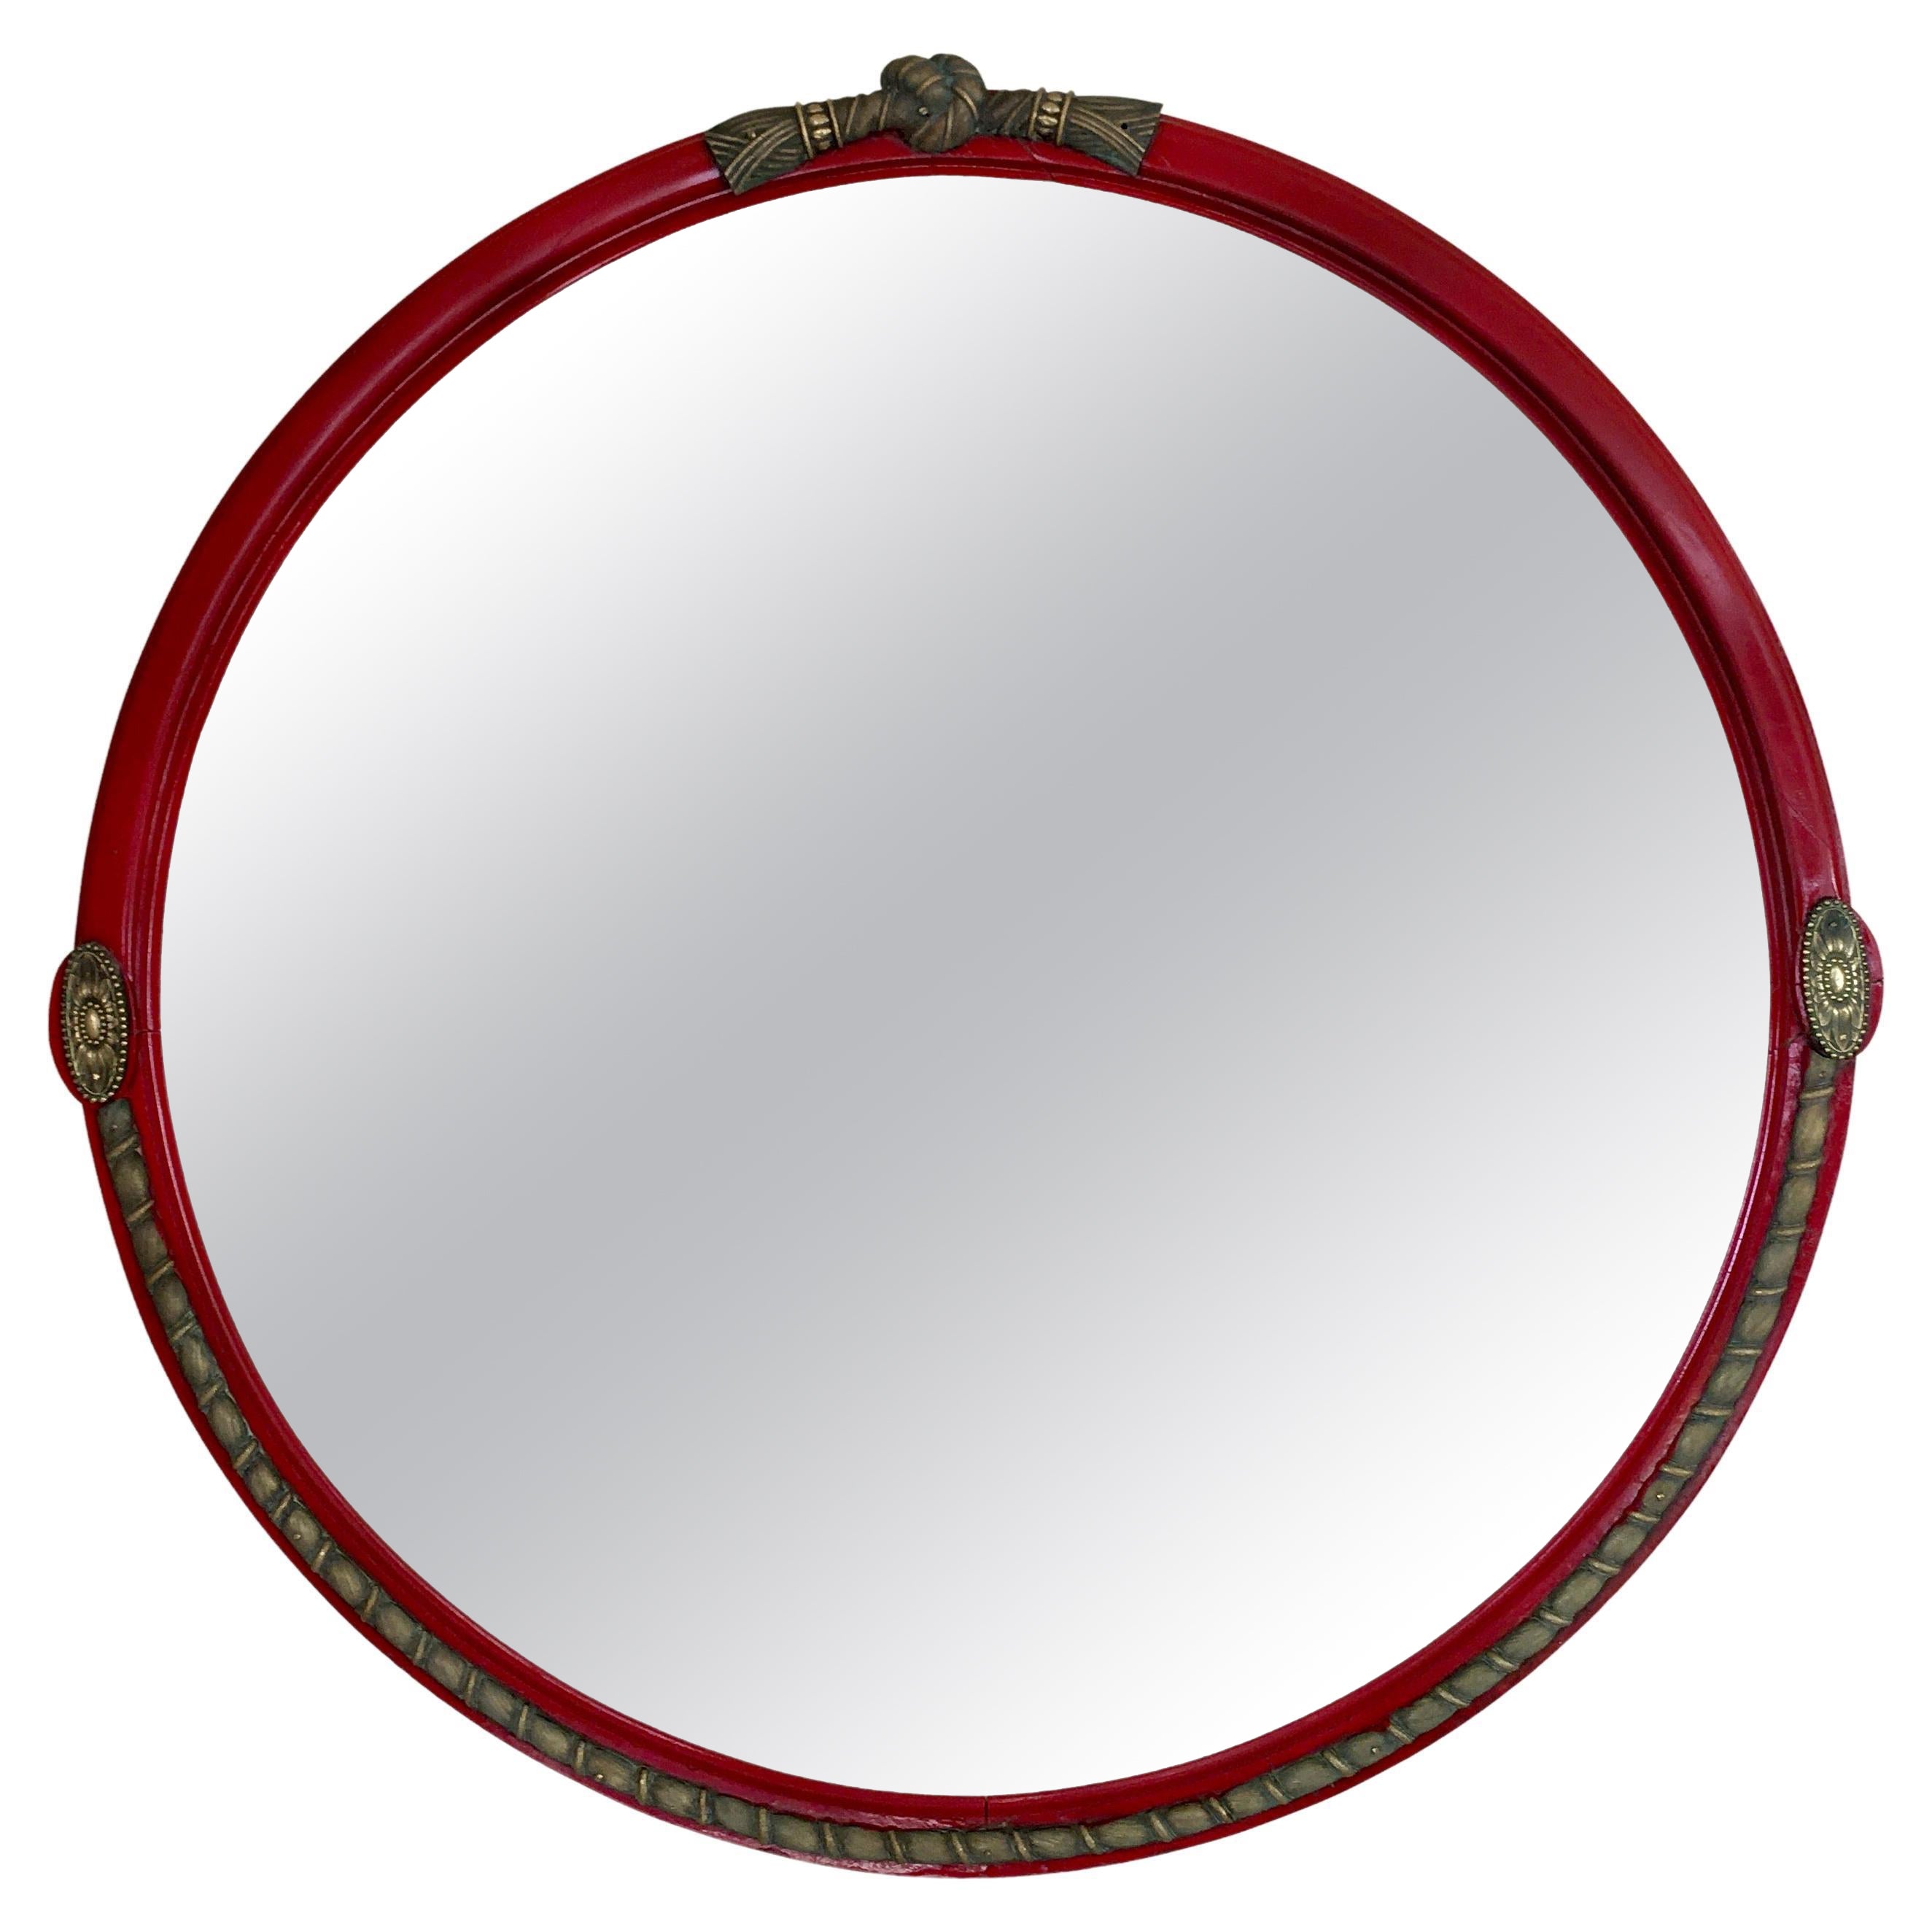 Large Circular Art Deco Red Lacquer Mirror by Sue and Mare, France, 1928 For Sale